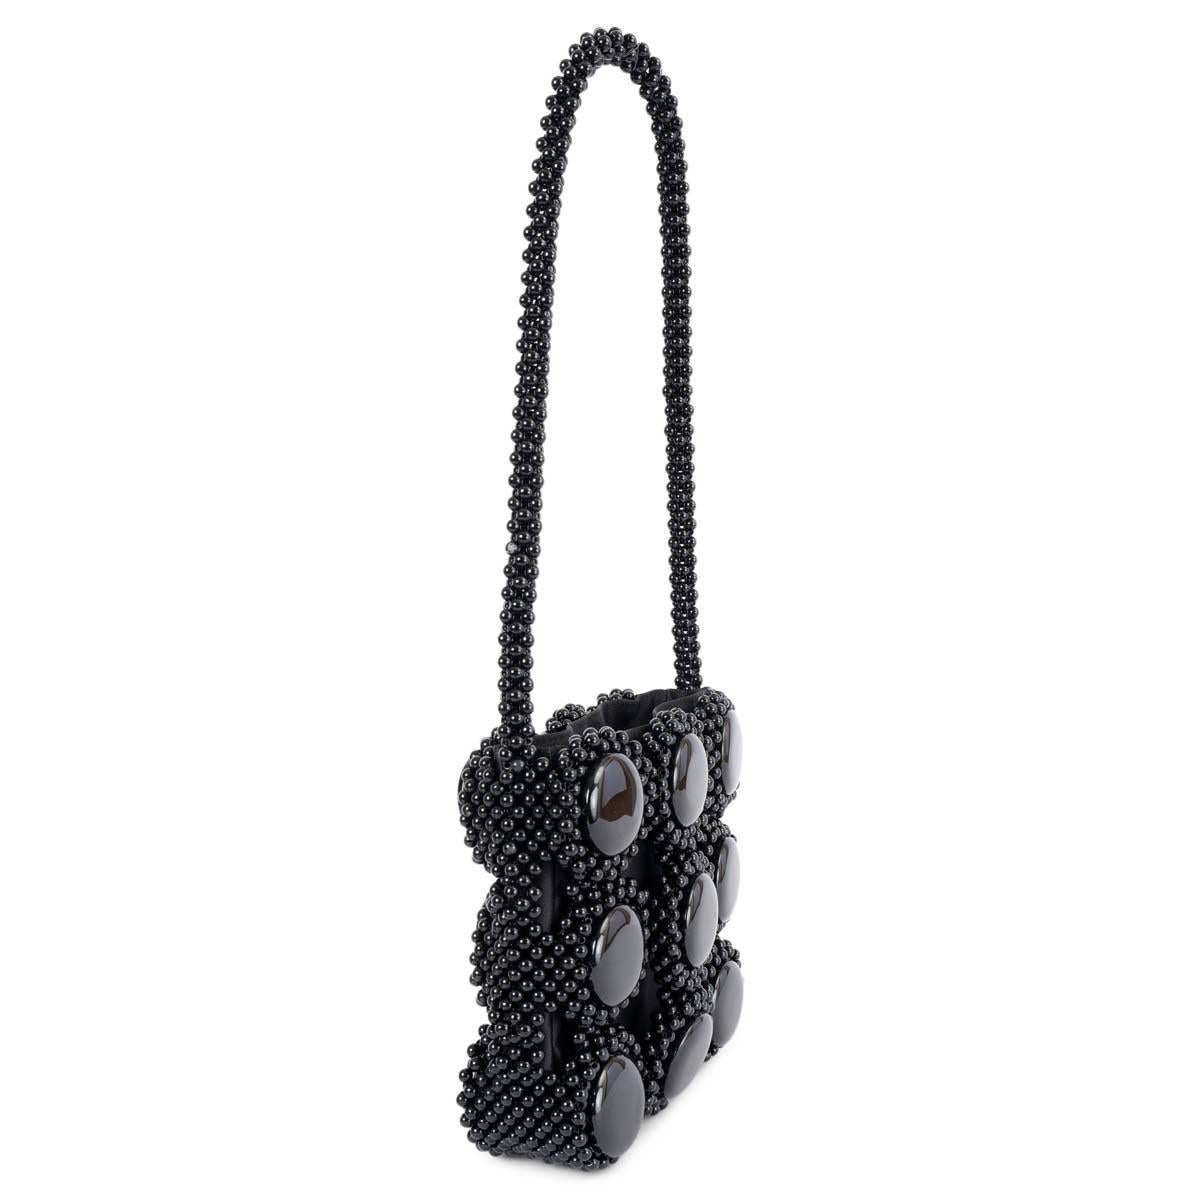 100% authentic Giorgio Armani evening shoulder bag embellished with black round beads with a silk satin inside pouch with drawstring closure. Has been carried and is in excellent condition. 

Measurements
Height	18cm (7in)
Width	18cm (7in)
Depth	5cm